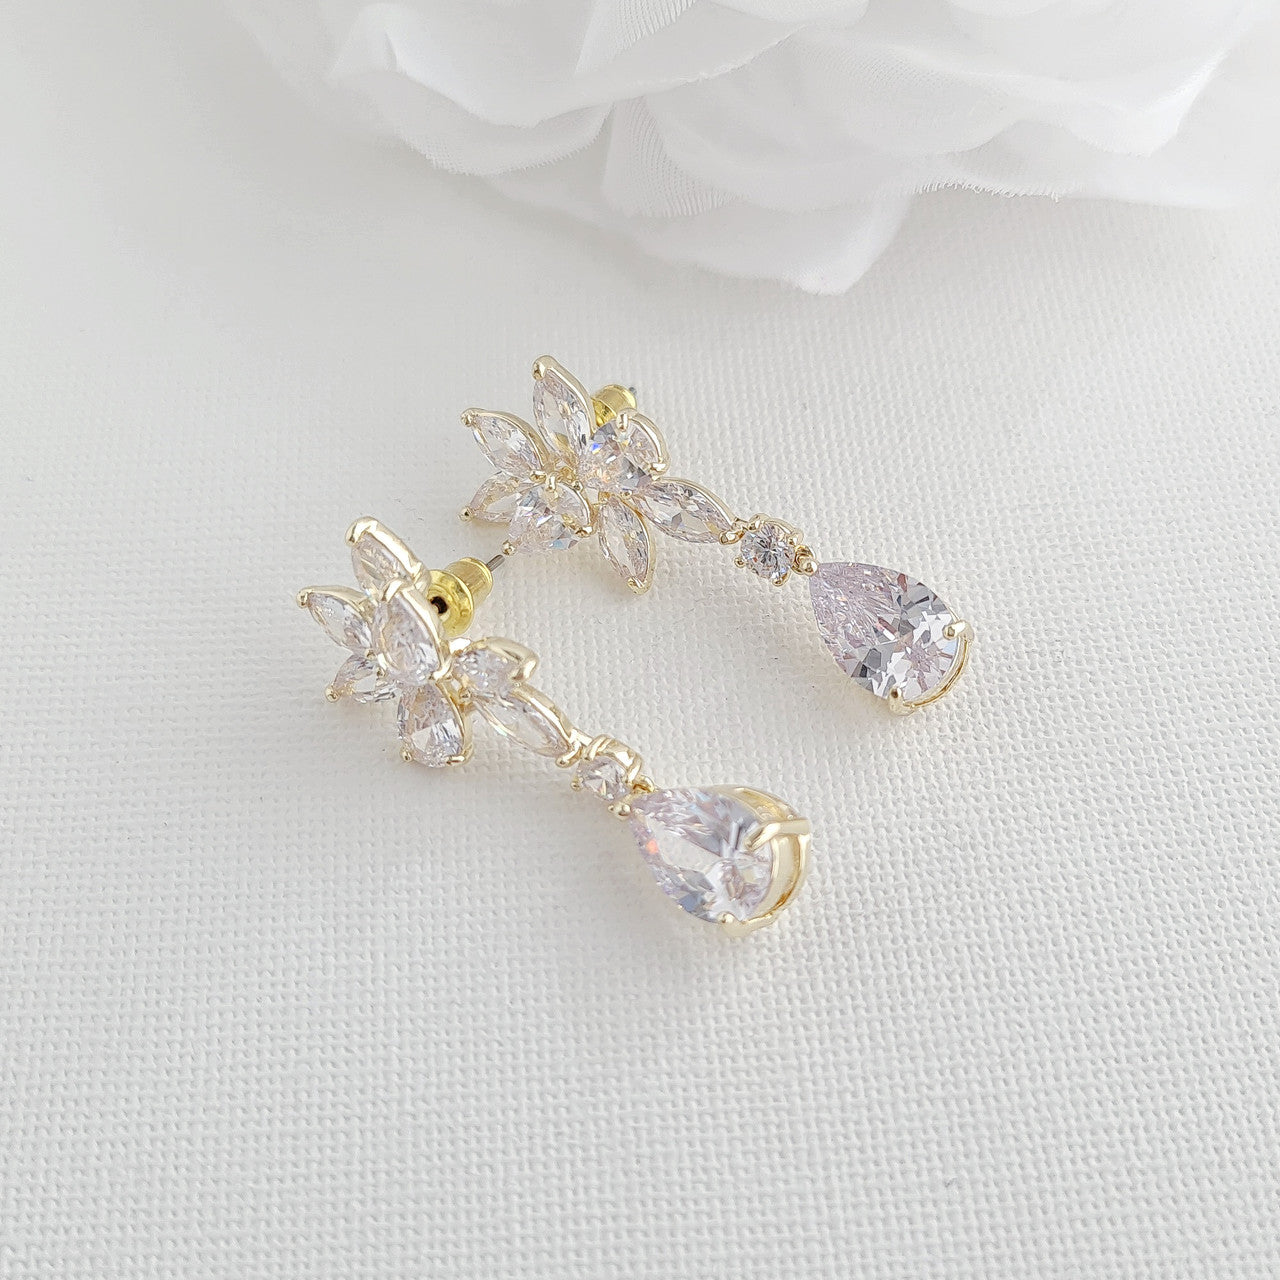 Rose Gold Floral and Teardrop Earrings For Brides-Ivy